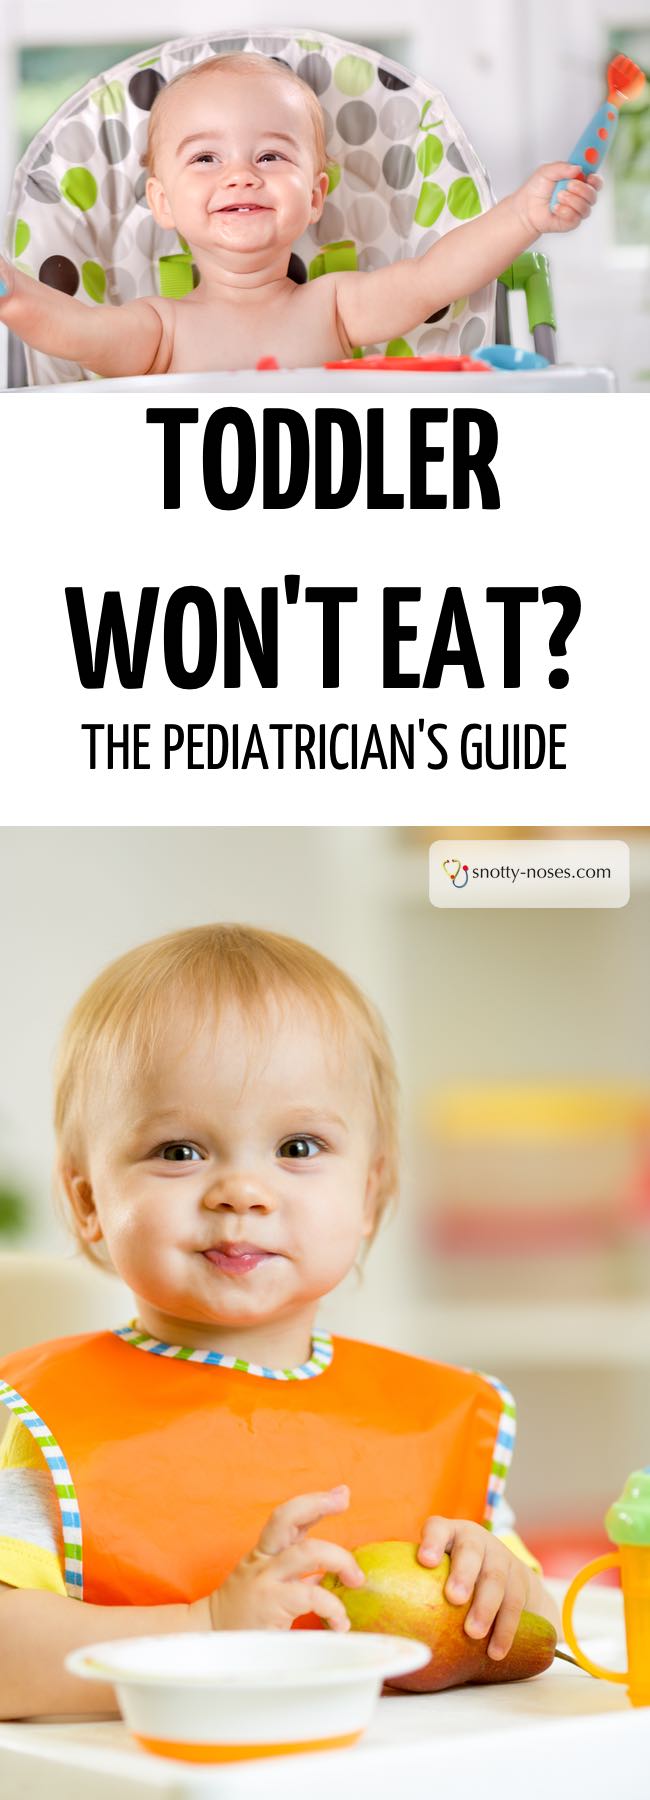 Toddler Won't Eat? The Pediatrician's Ultimate Guide.